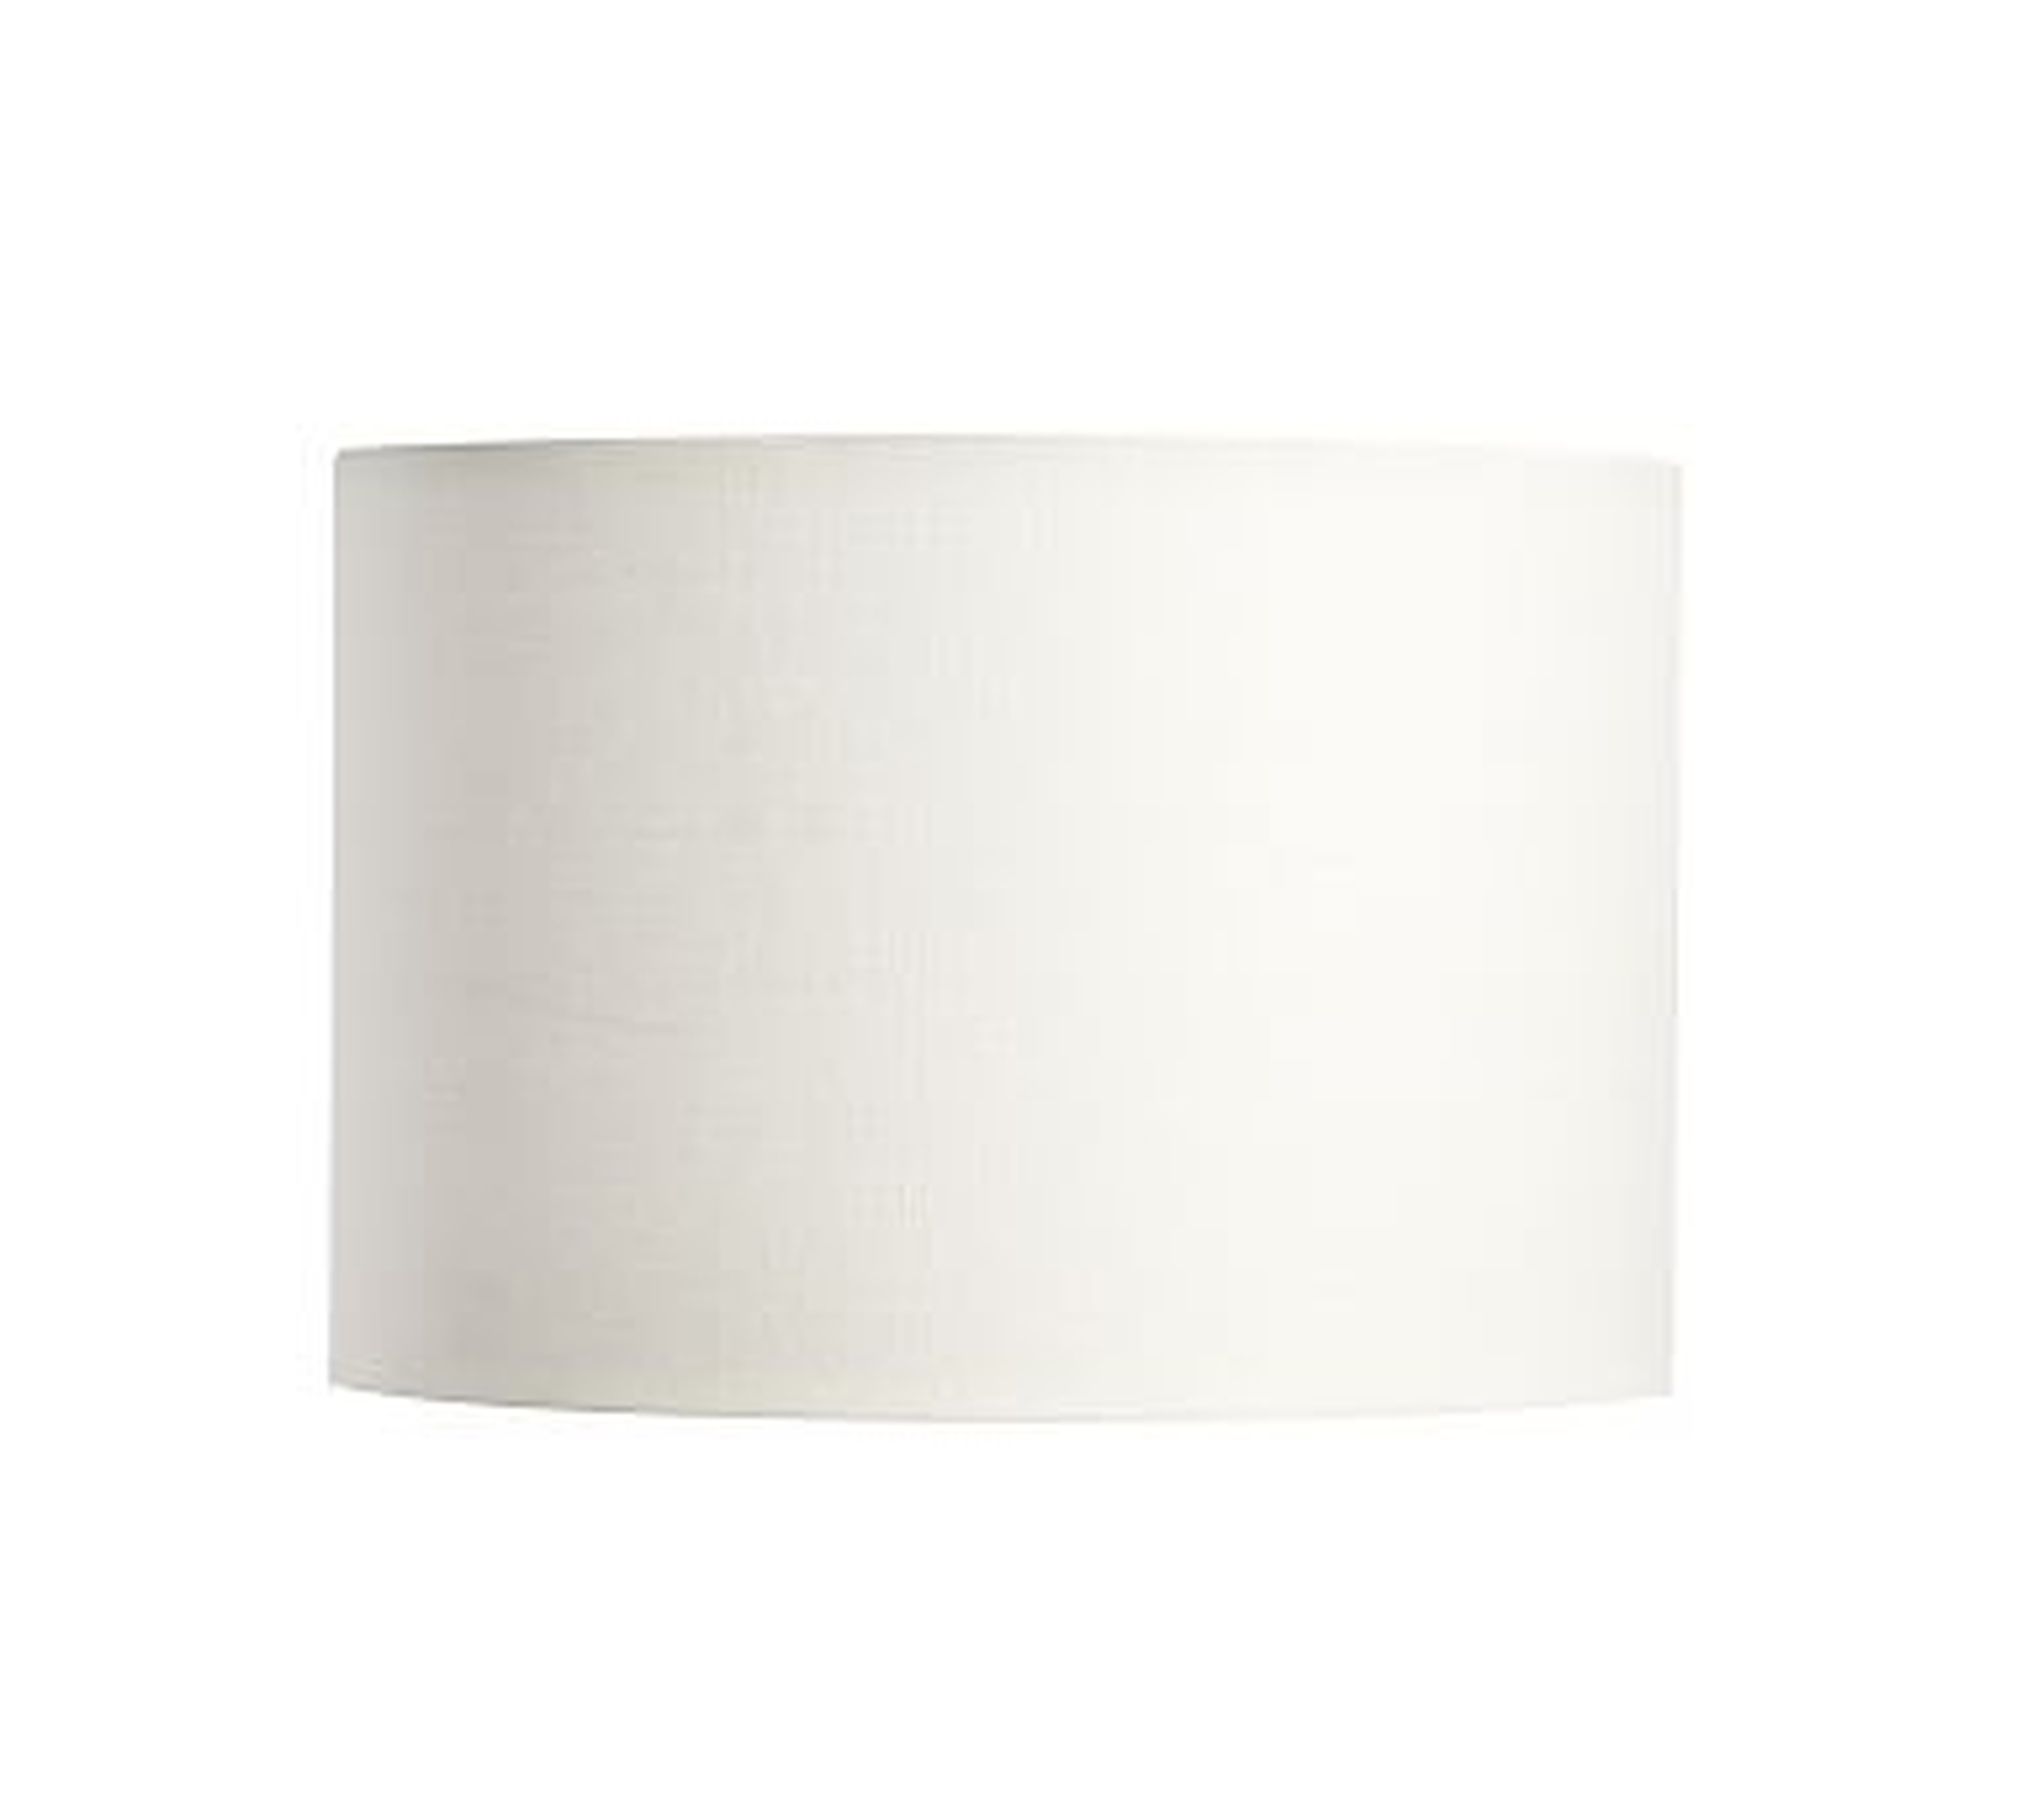 Gallery Straight-Sided Linen Drum Lamp Shade, Small, White - Pottery Barn